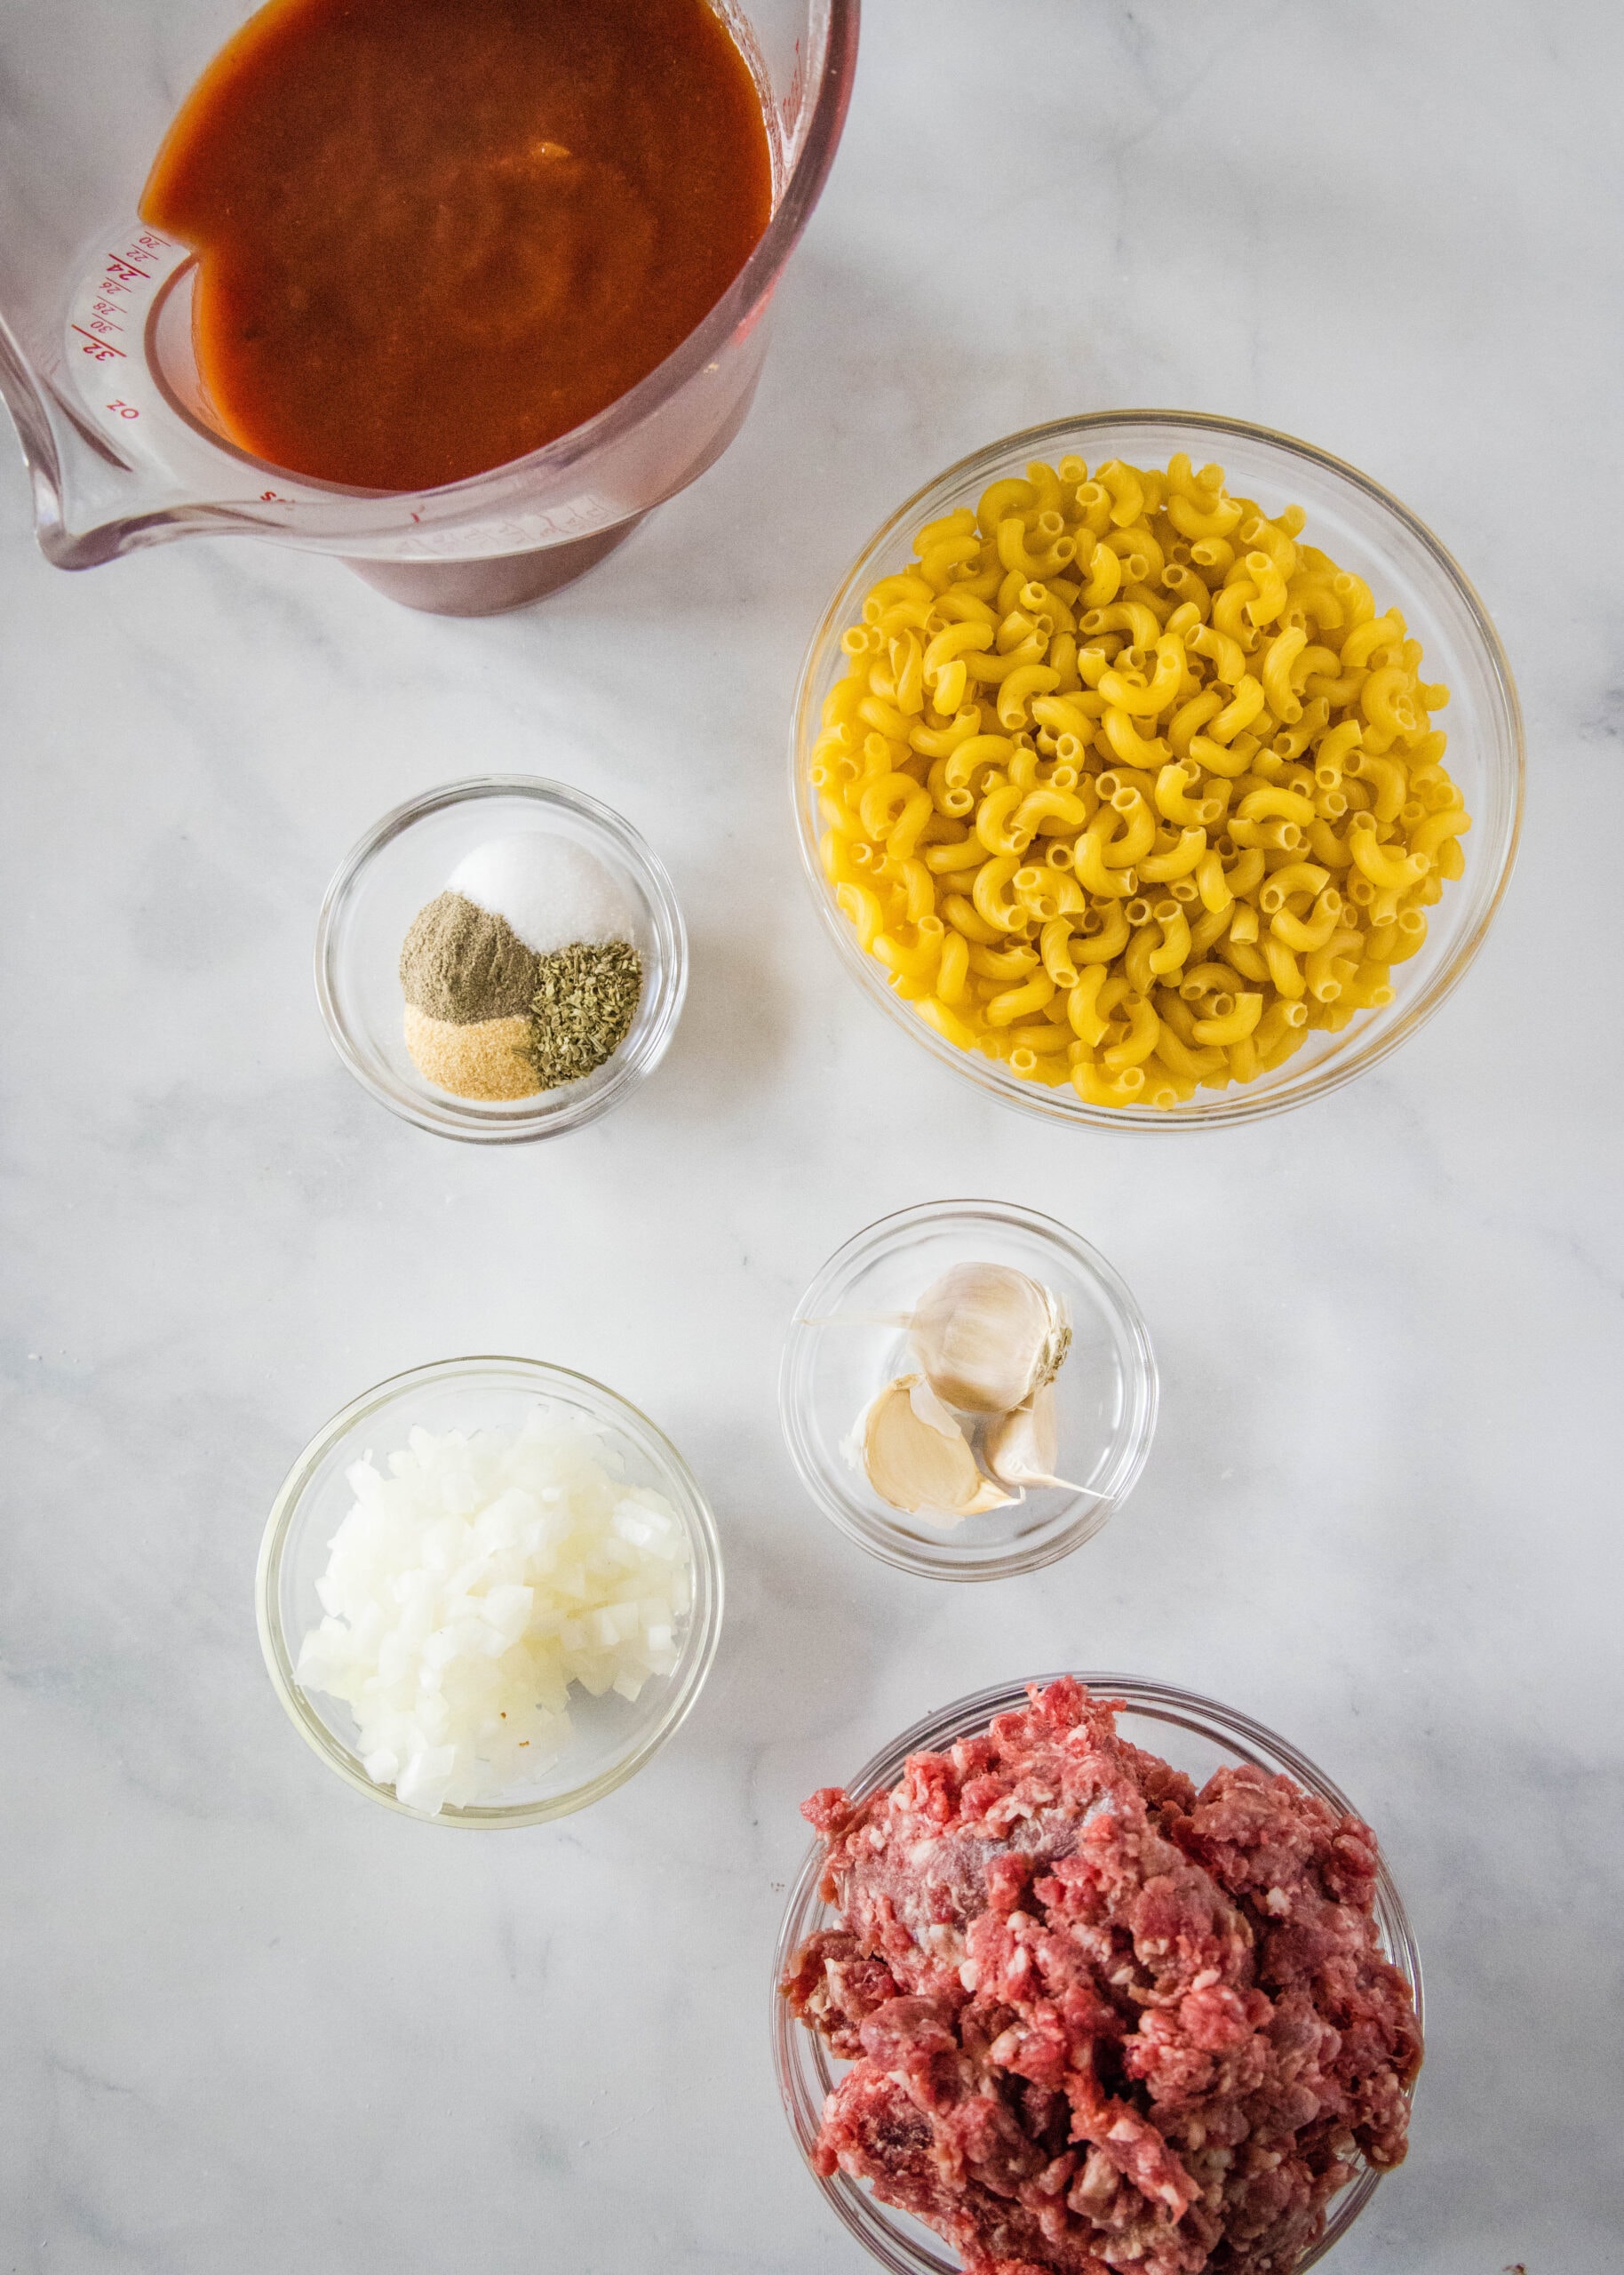 Overhead view of the ingredients needed for beefaroni: a bowl of macaroni, a bowl of ground beef, a pitcher of tomato sauce, a bowl of seasonings, a bowl of garlic, and a bowl of onions